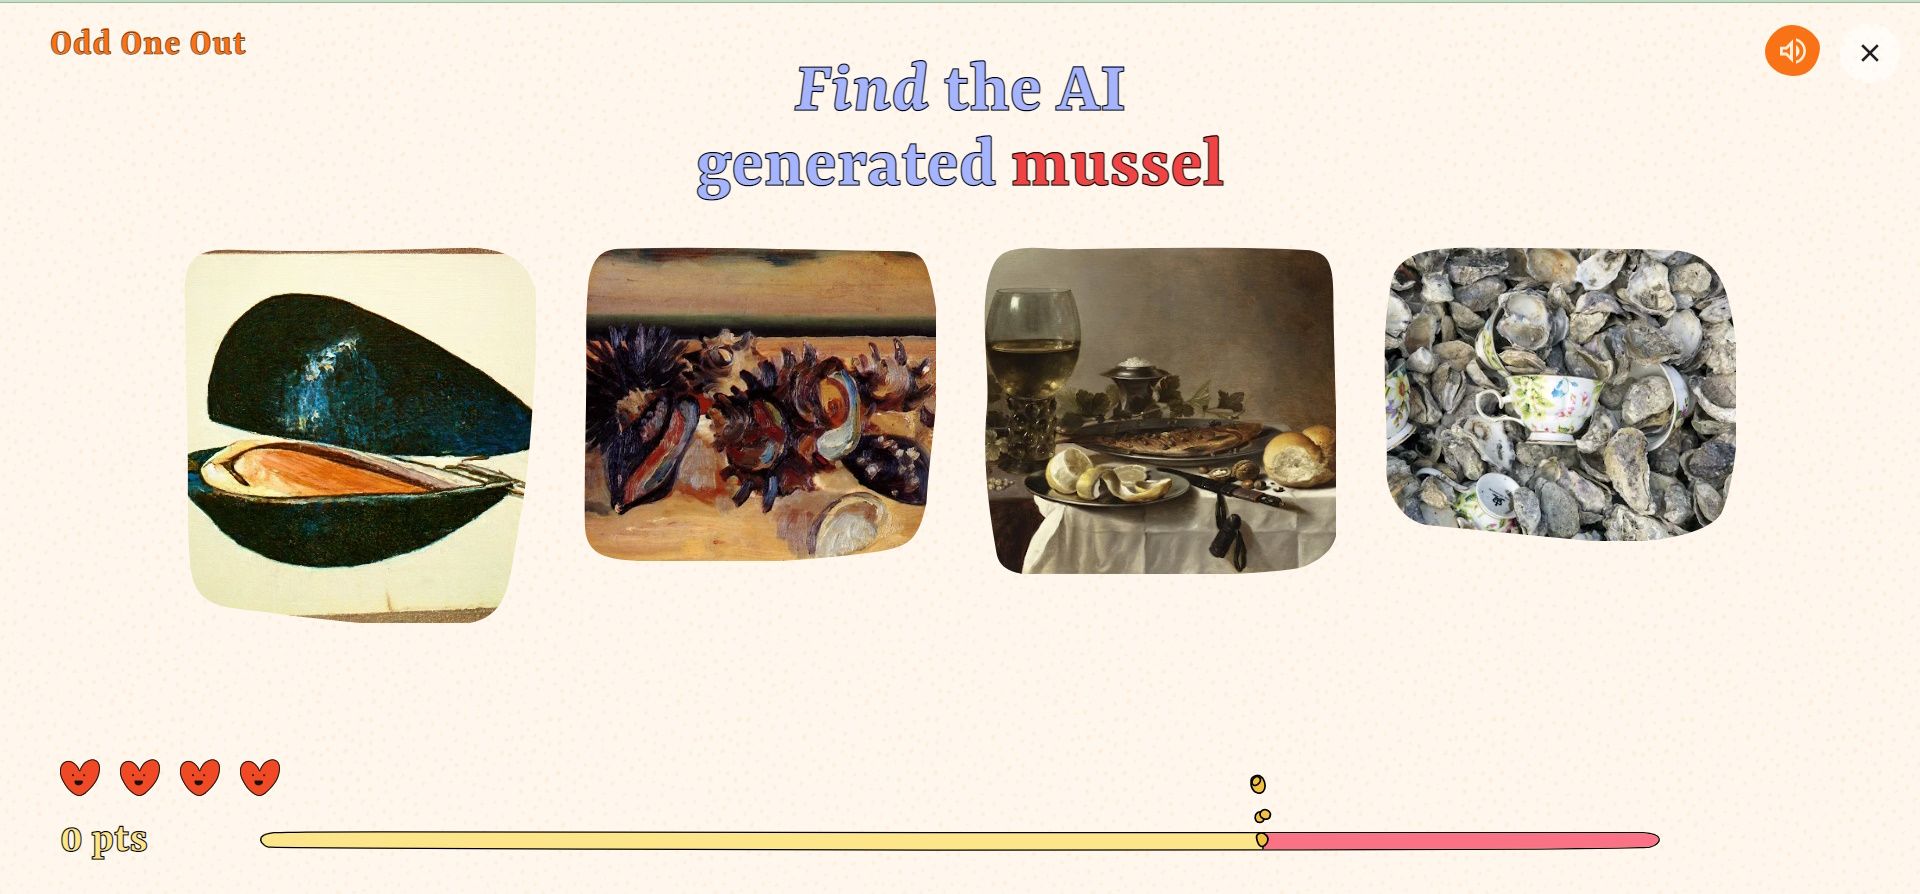 a screenshot from the Google AI game Odd One Out with four images showing so the player can pick the one generated by AI